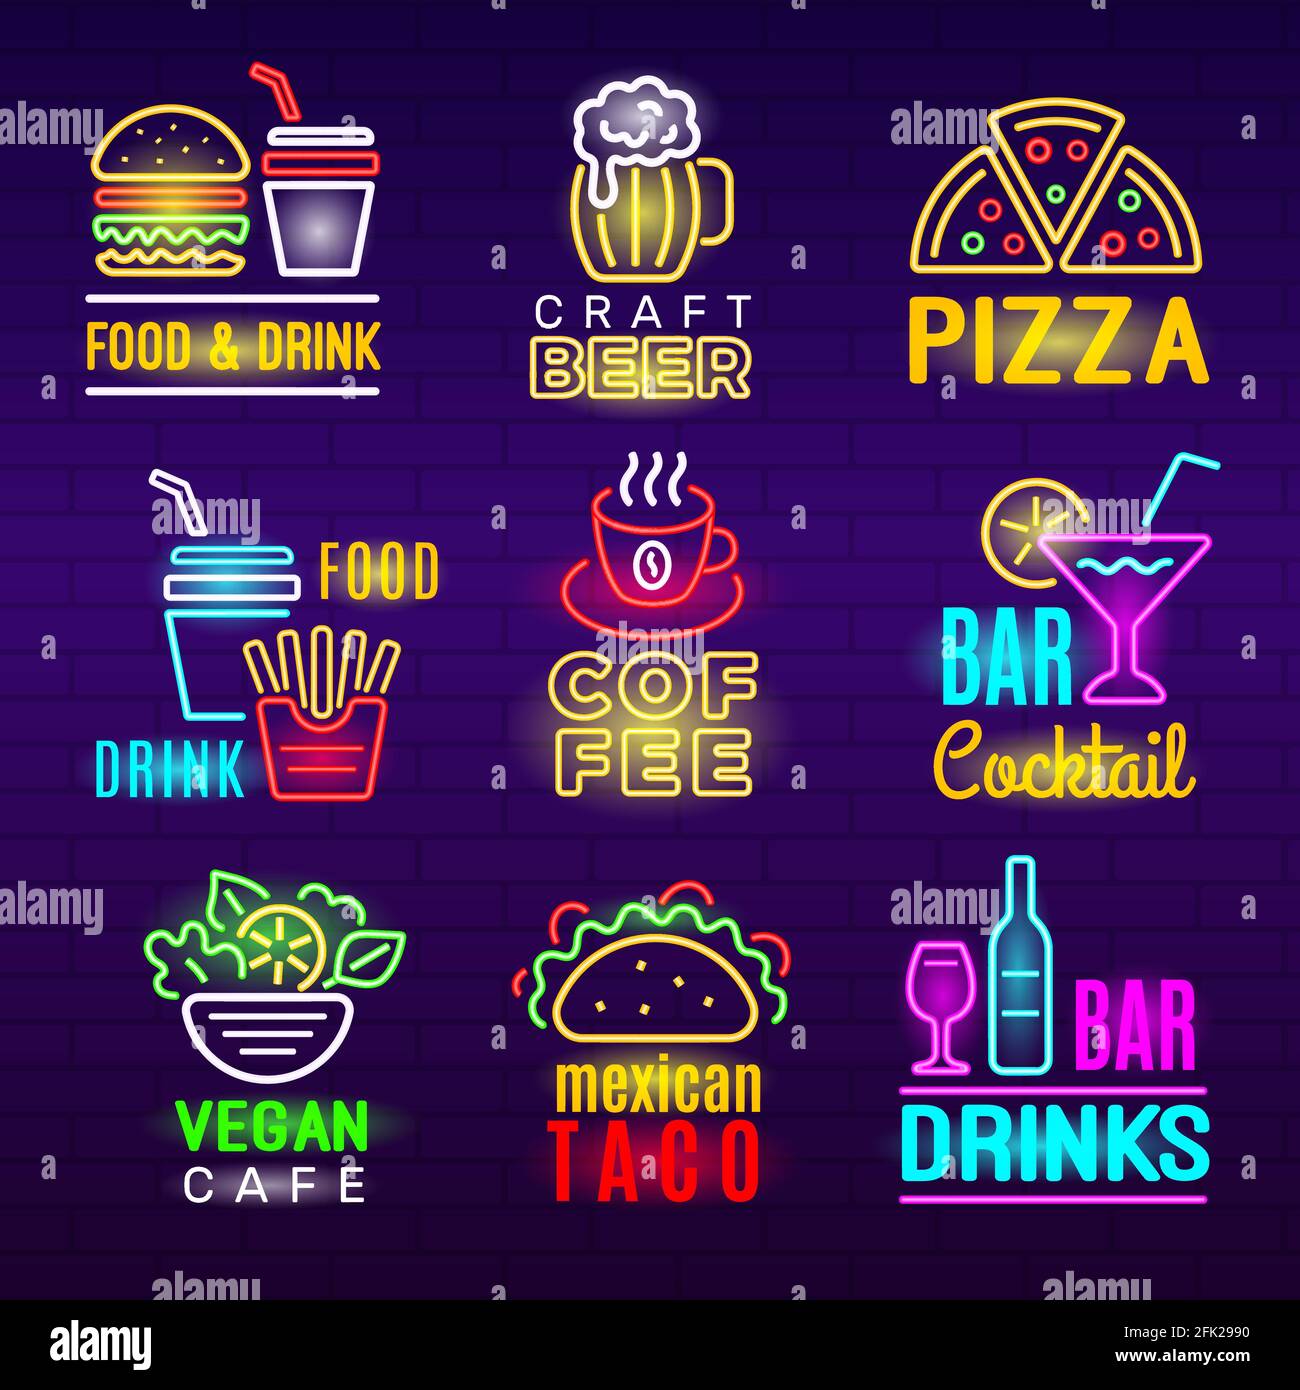 Food neon icon. Beer drinks light advertising emblem pizza craft products vector set Stock Vector